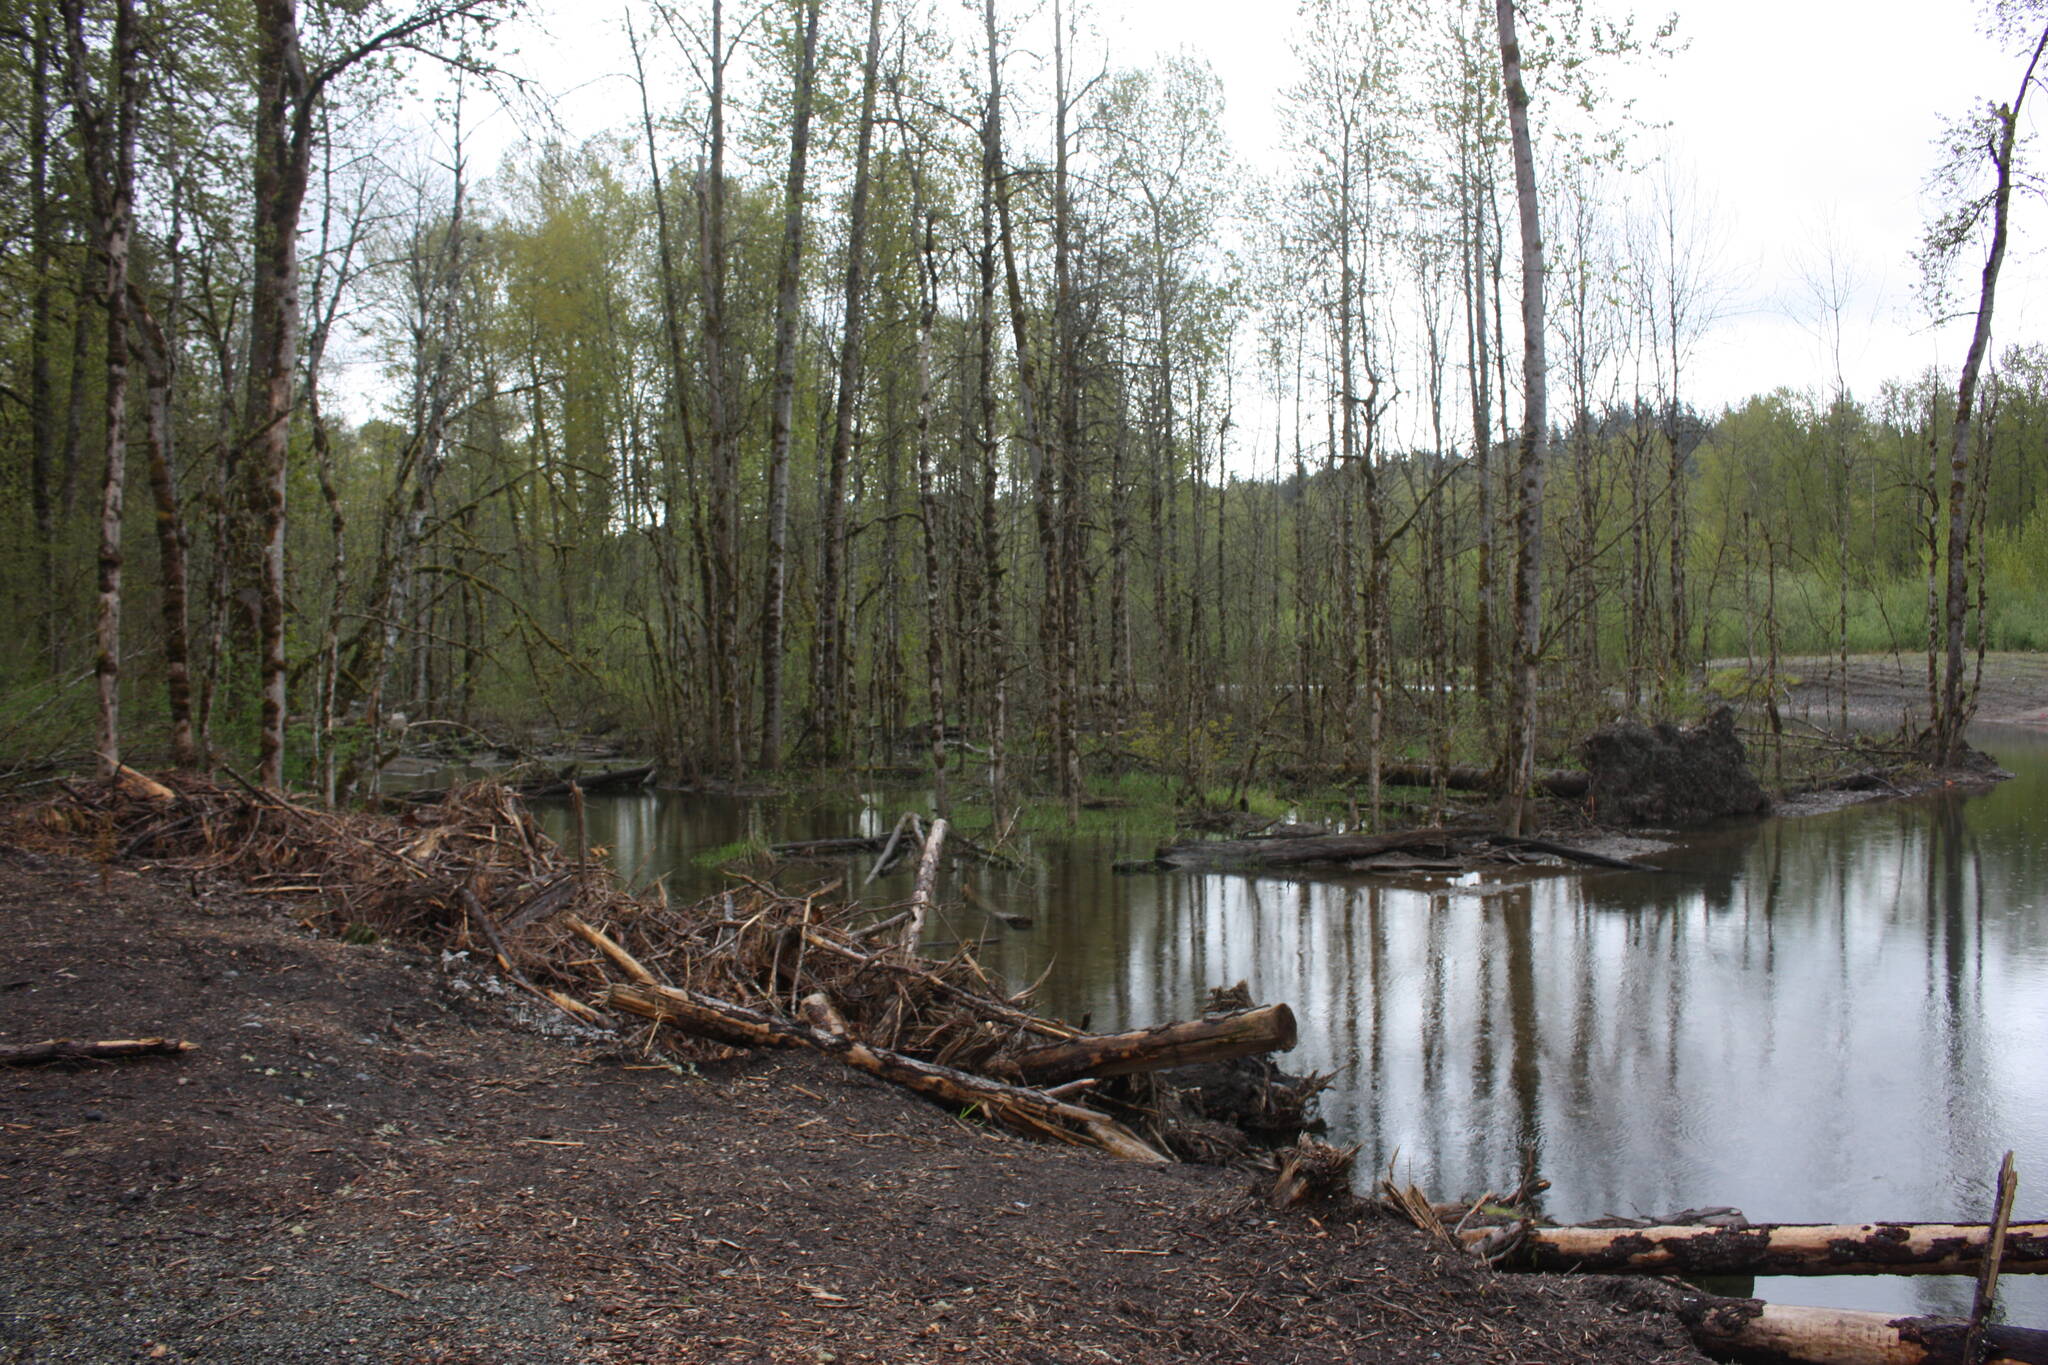 The site of where the Lones Levee was cleared on Green River. Downed trees were placed on the banks as the river spreads into multiple channels. (Cameron Sheppard/Sound Publishing)